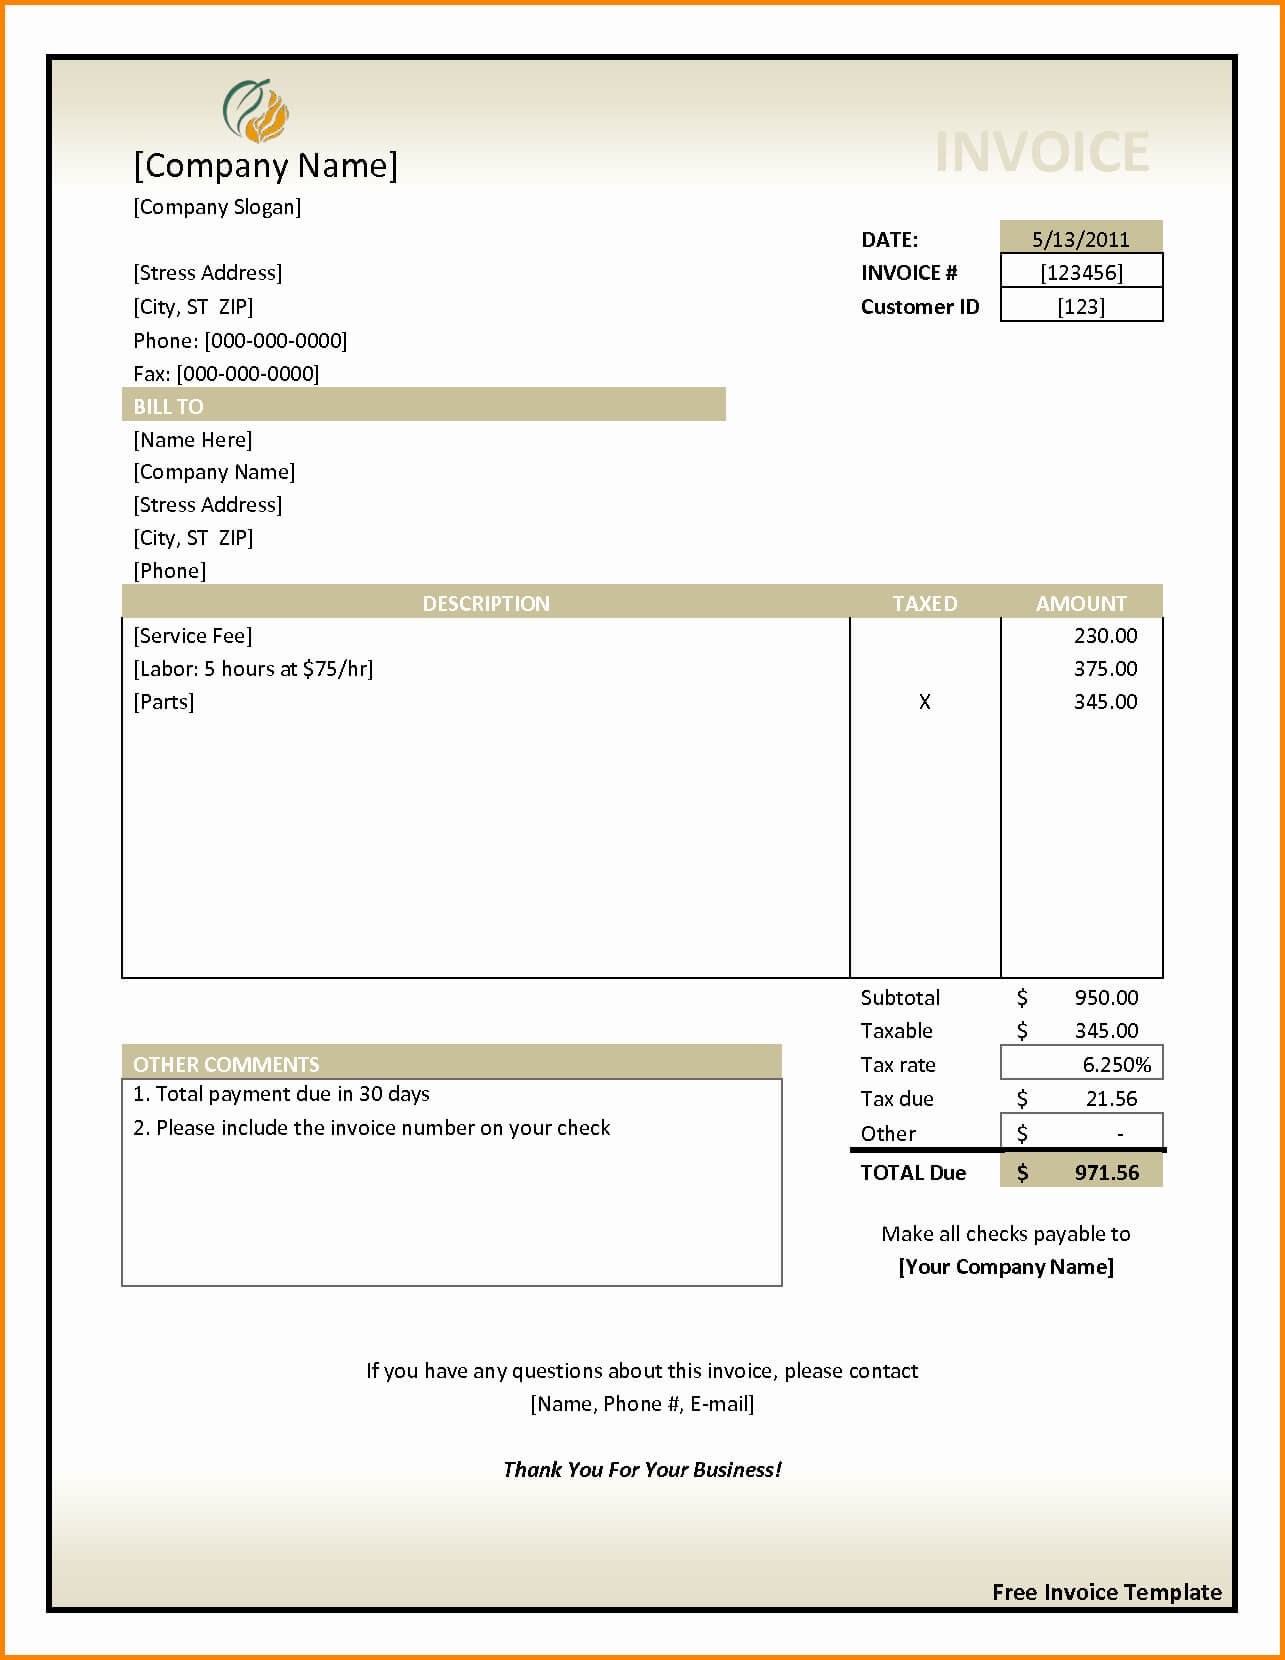 Sample Invoice Template Word | Cialis Genericcheapest Price Pertaining To Invoice Template Word 2010